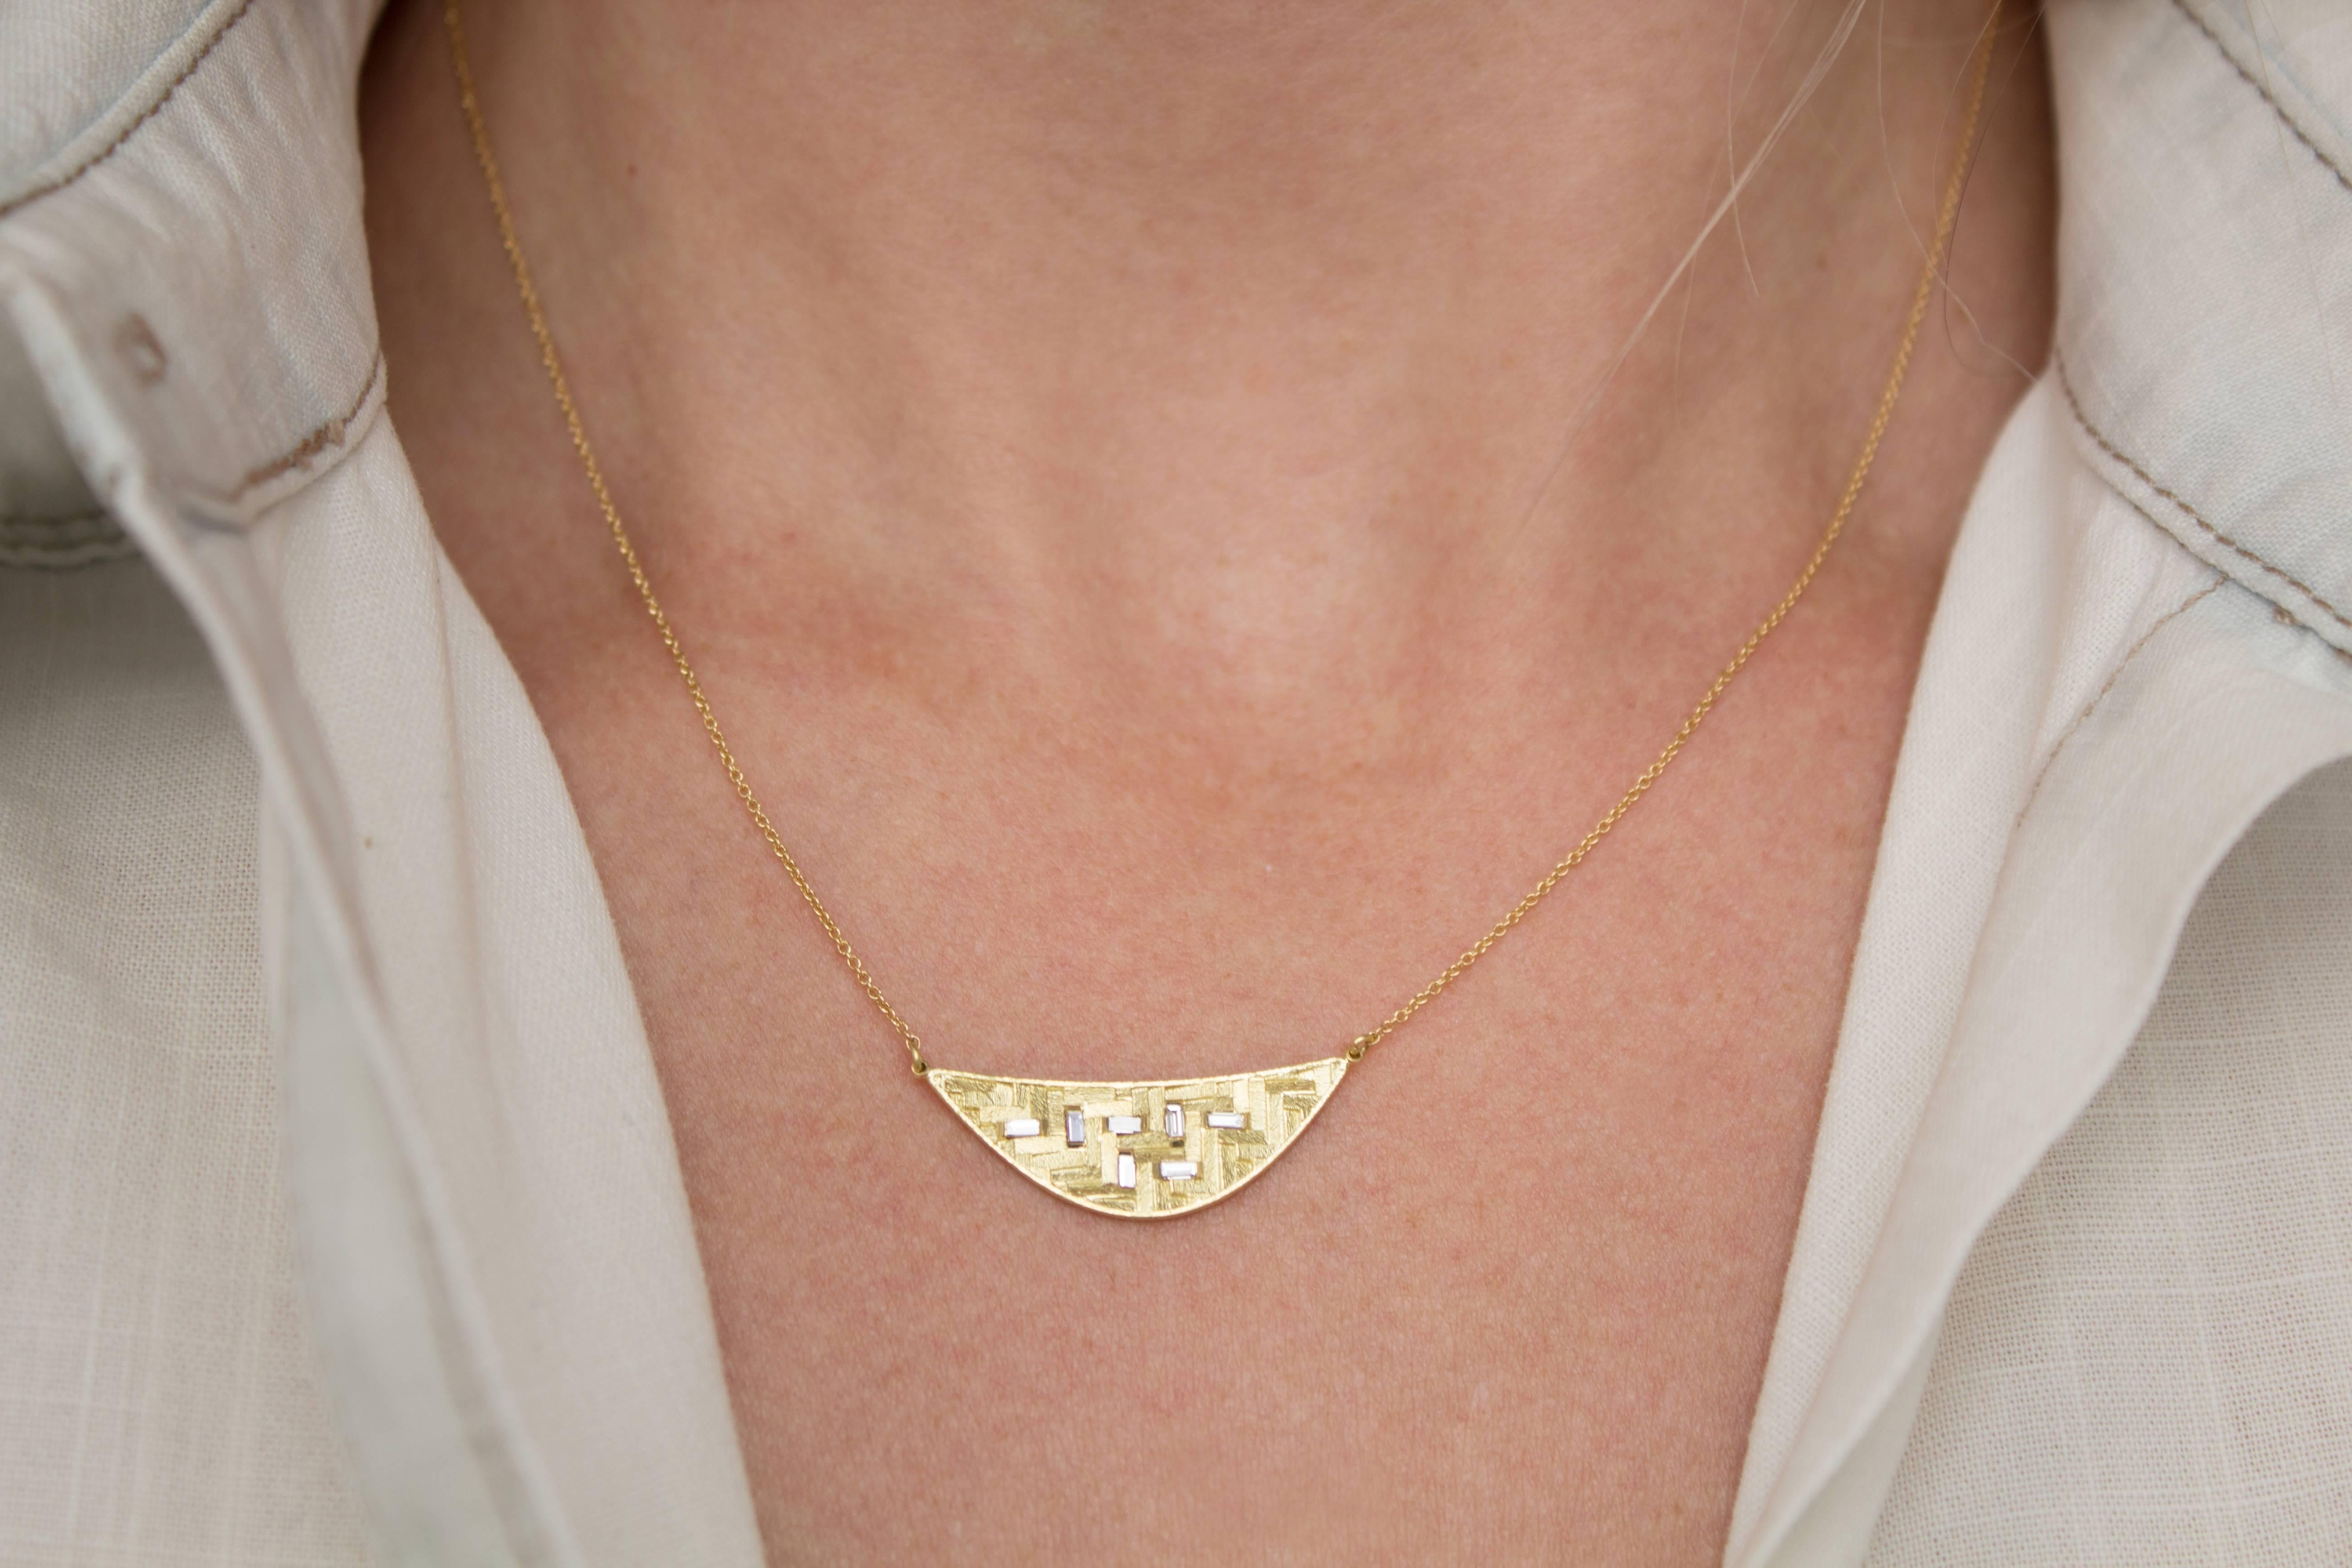 Crescent Parquet Necklace handcrafted in London by jewelry designer Jo Hayes Ward in her signature-finished reflective 18k yellow gold featuring seven white diamonds baguettes totaling 0.15 carats, on an 18k yellow gold 18